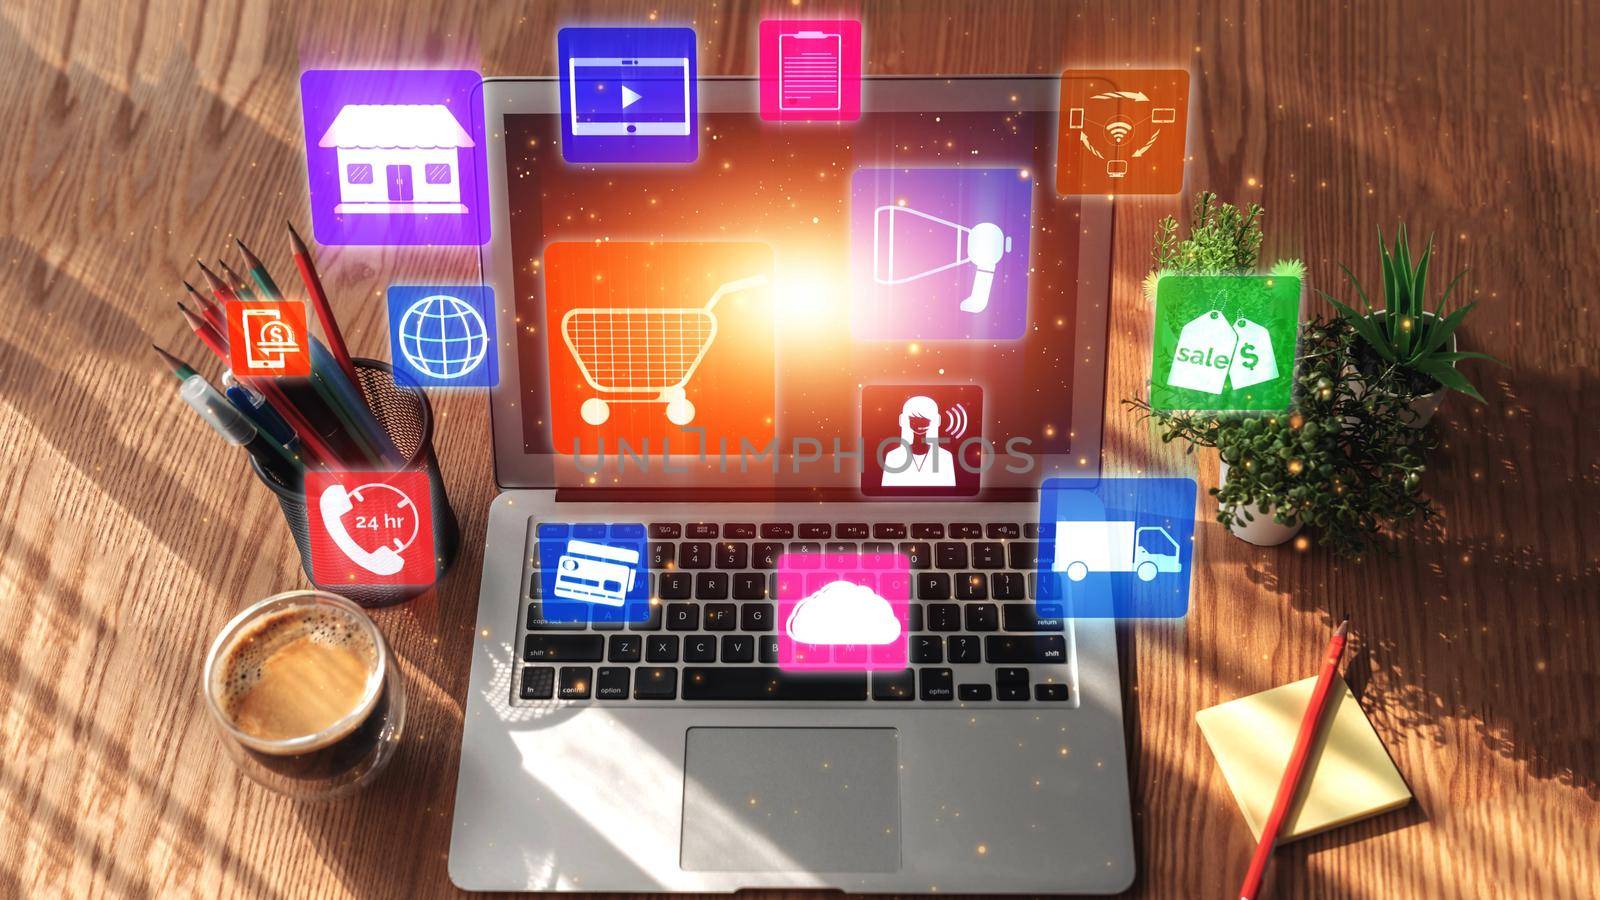 Omni channel technology of online retail business approach by biancoblue